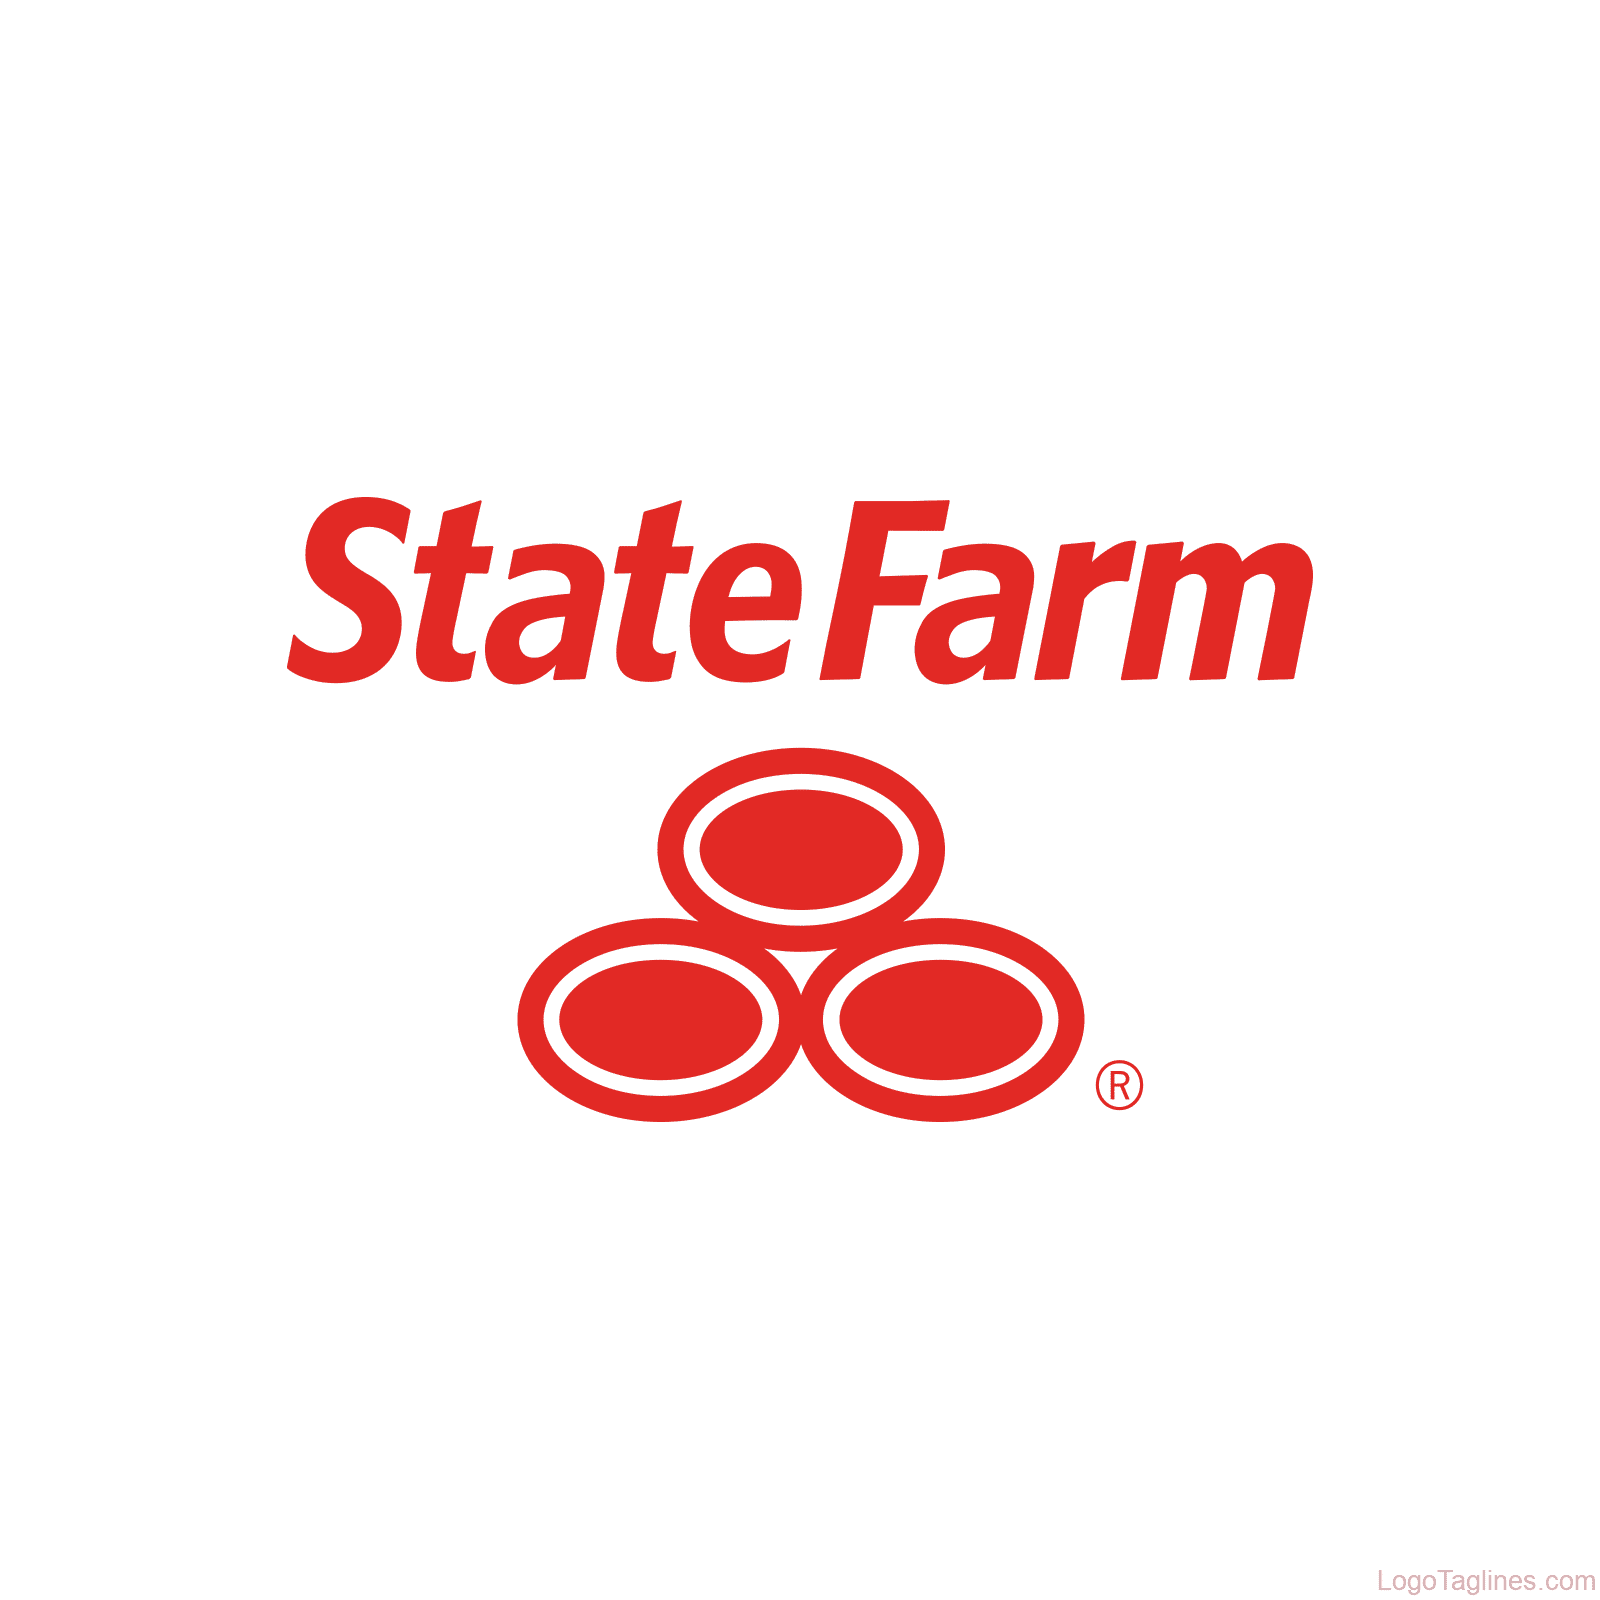 Featured image for “JJ Edwards State Farm”